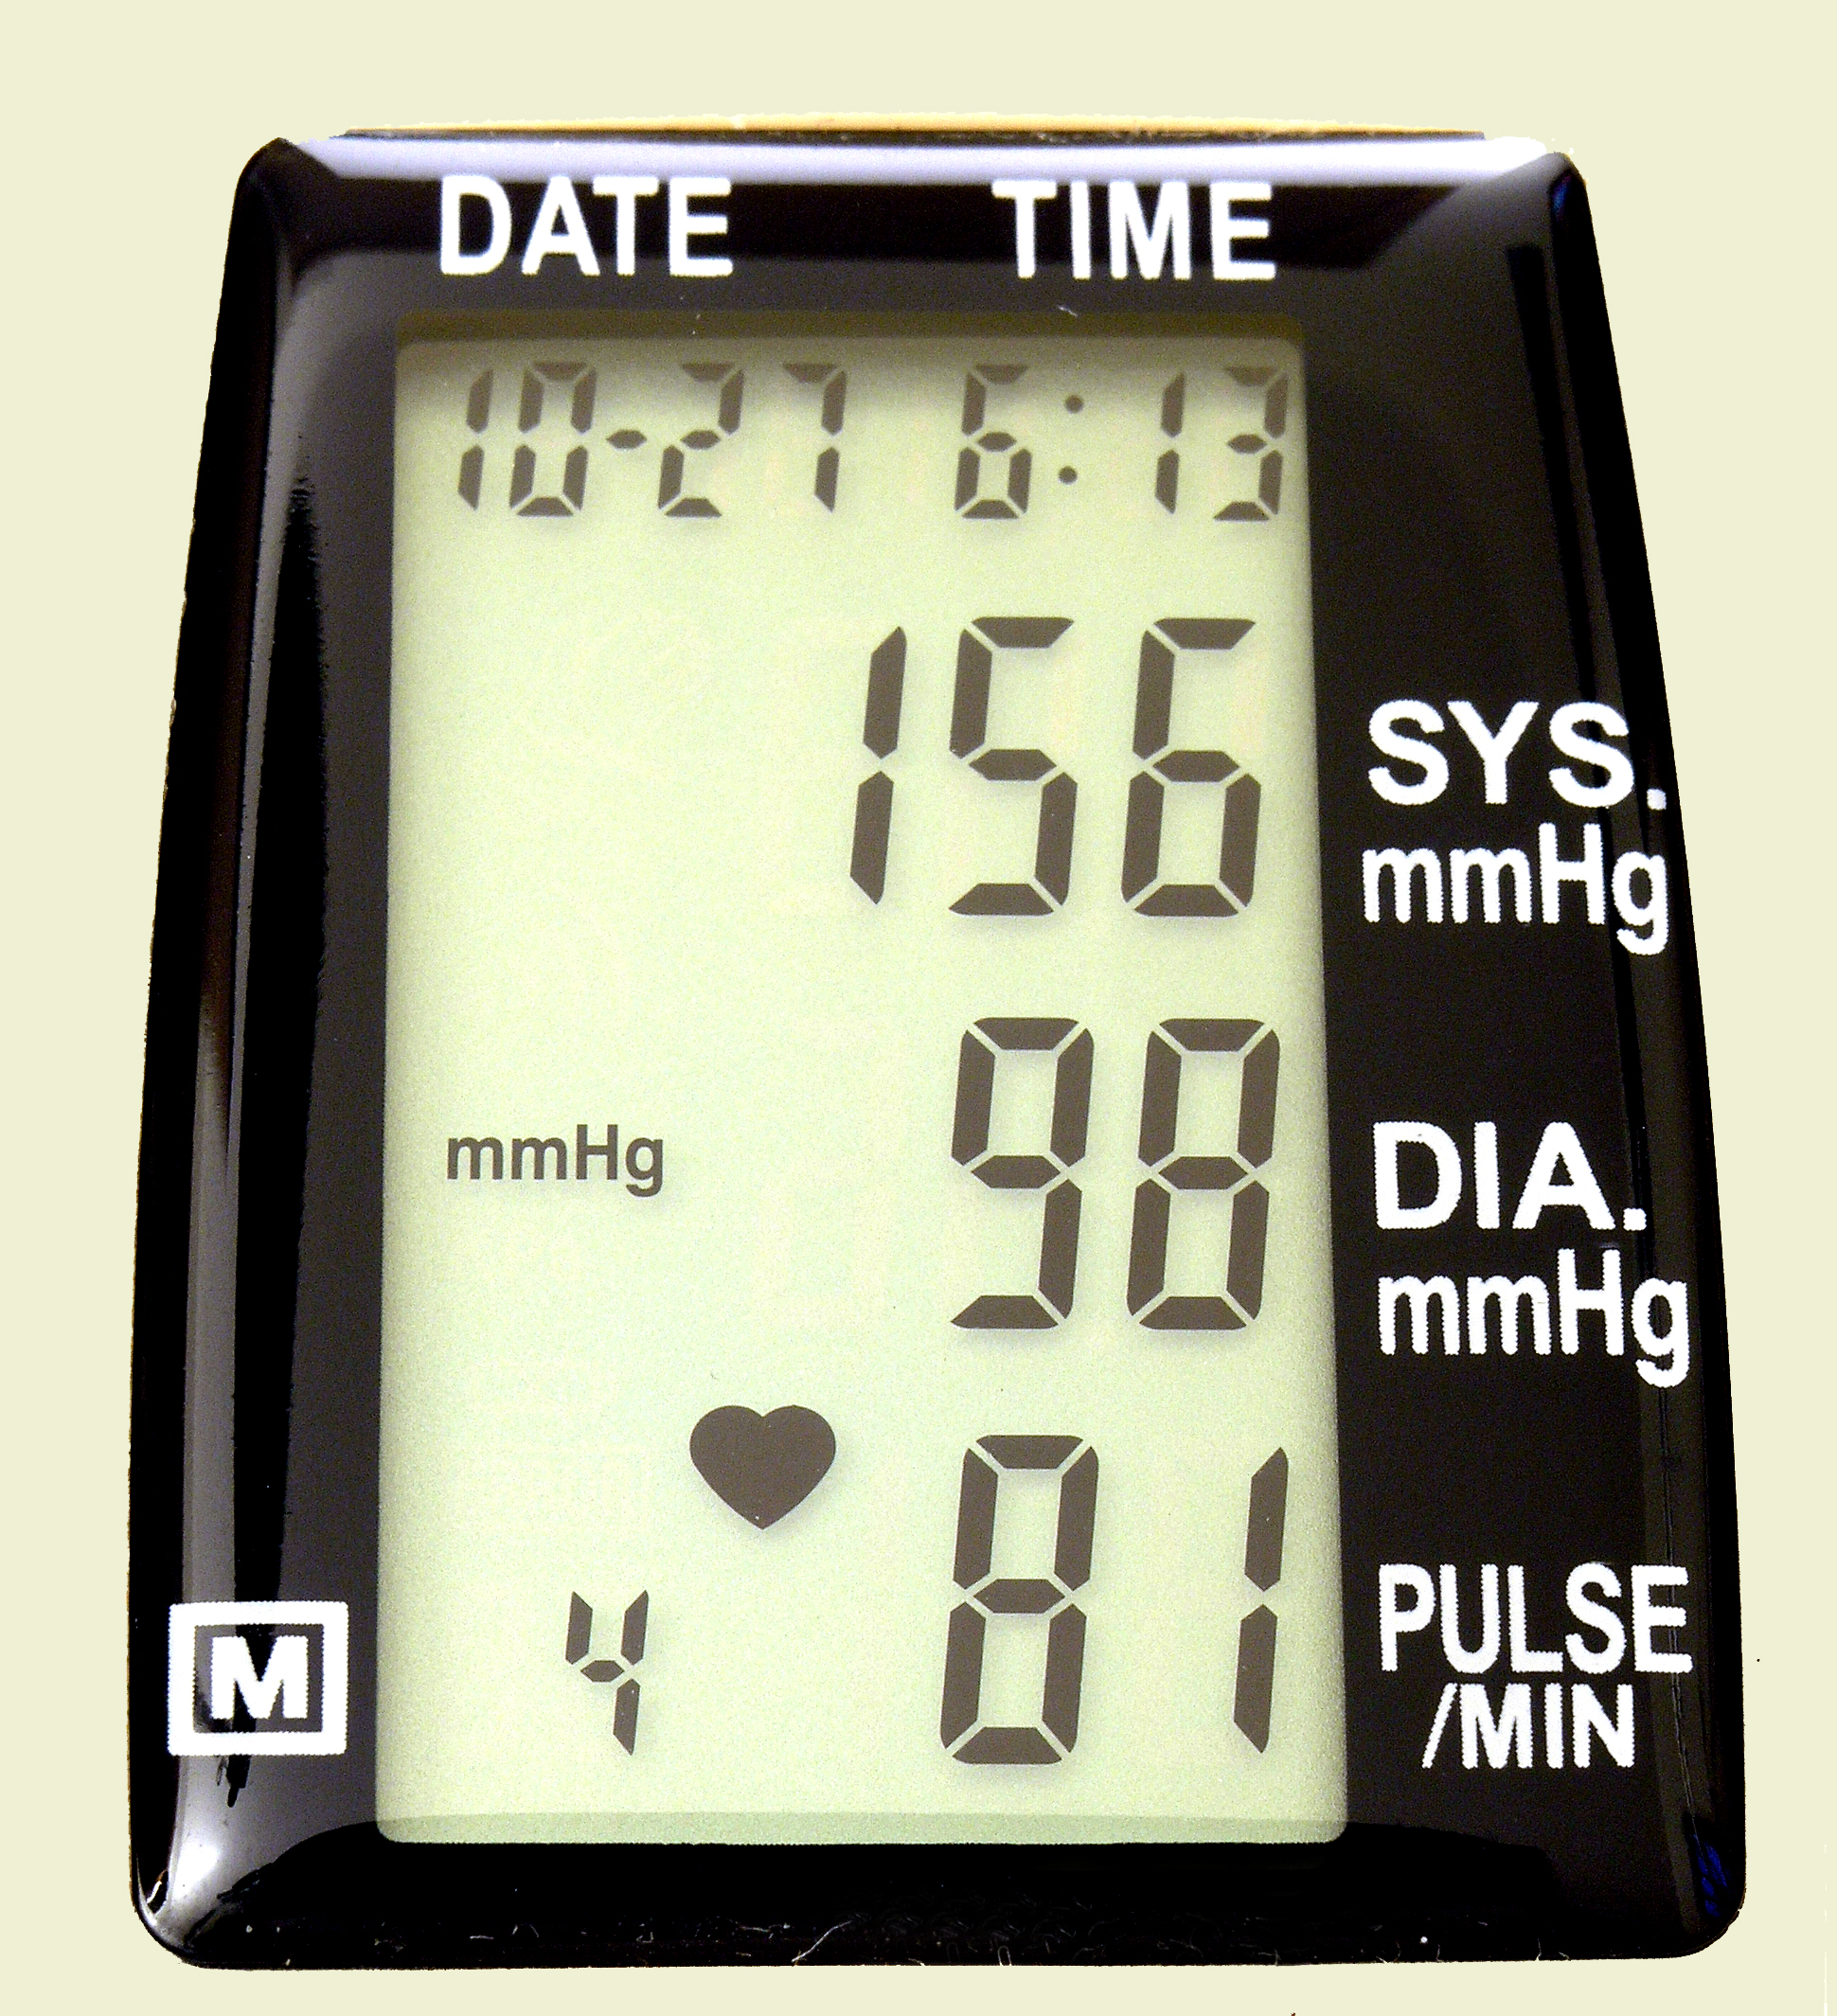 HIGH BLOOD PRESSURE ONE IN FIVE AMERICANS HAVE HIGH